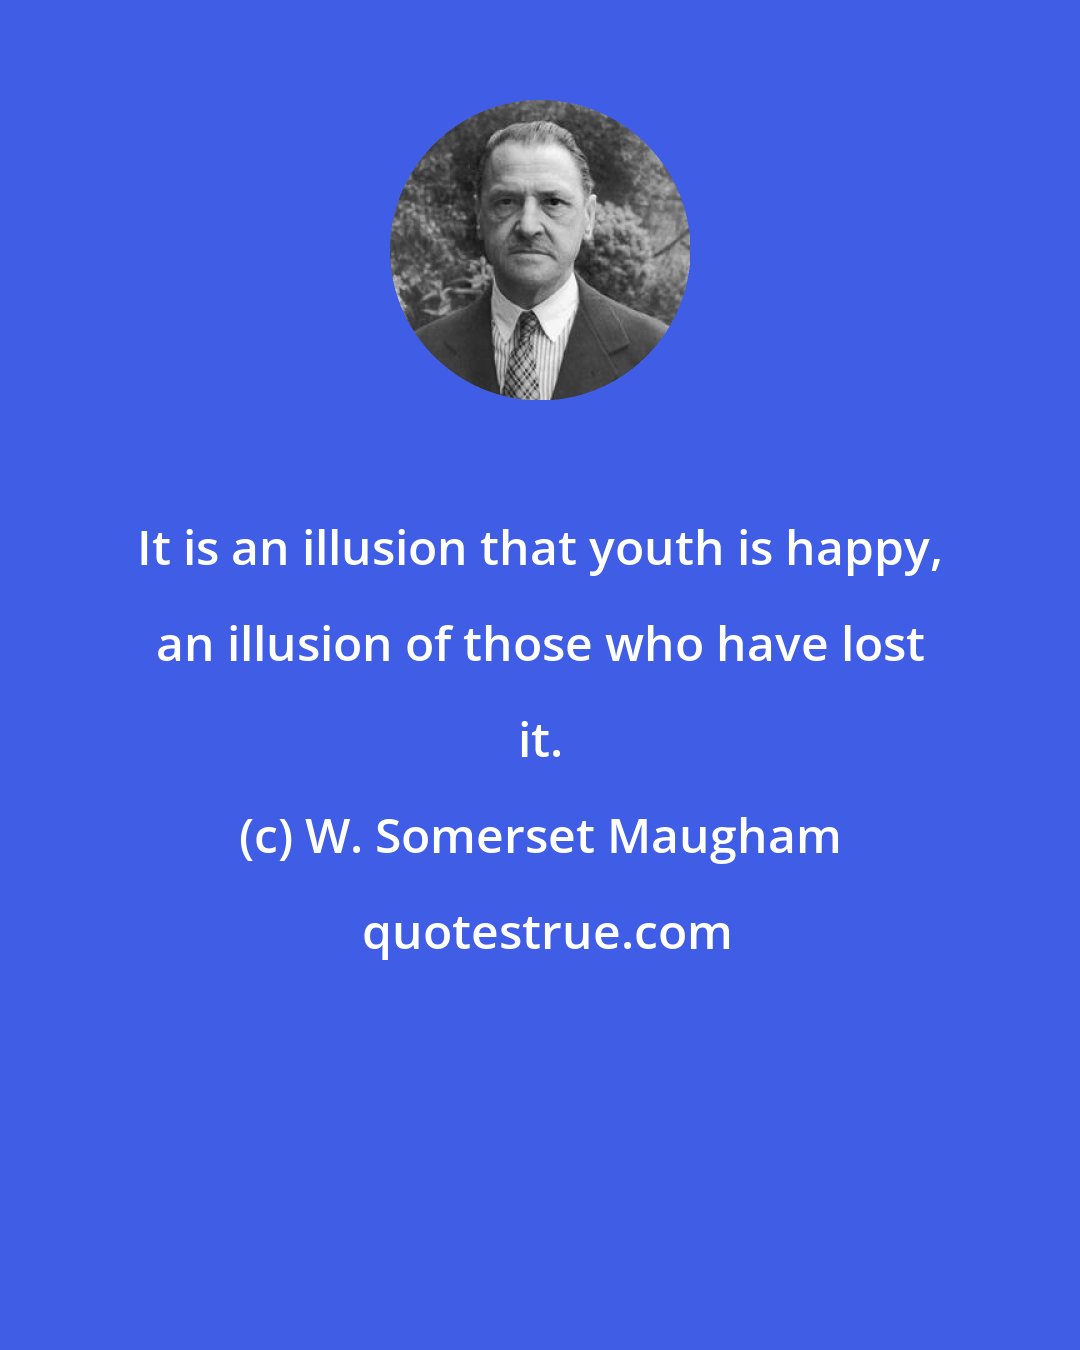 W. Somerset Maugham: It is an illusion that youth is happy, an illusion of those who have lost it.